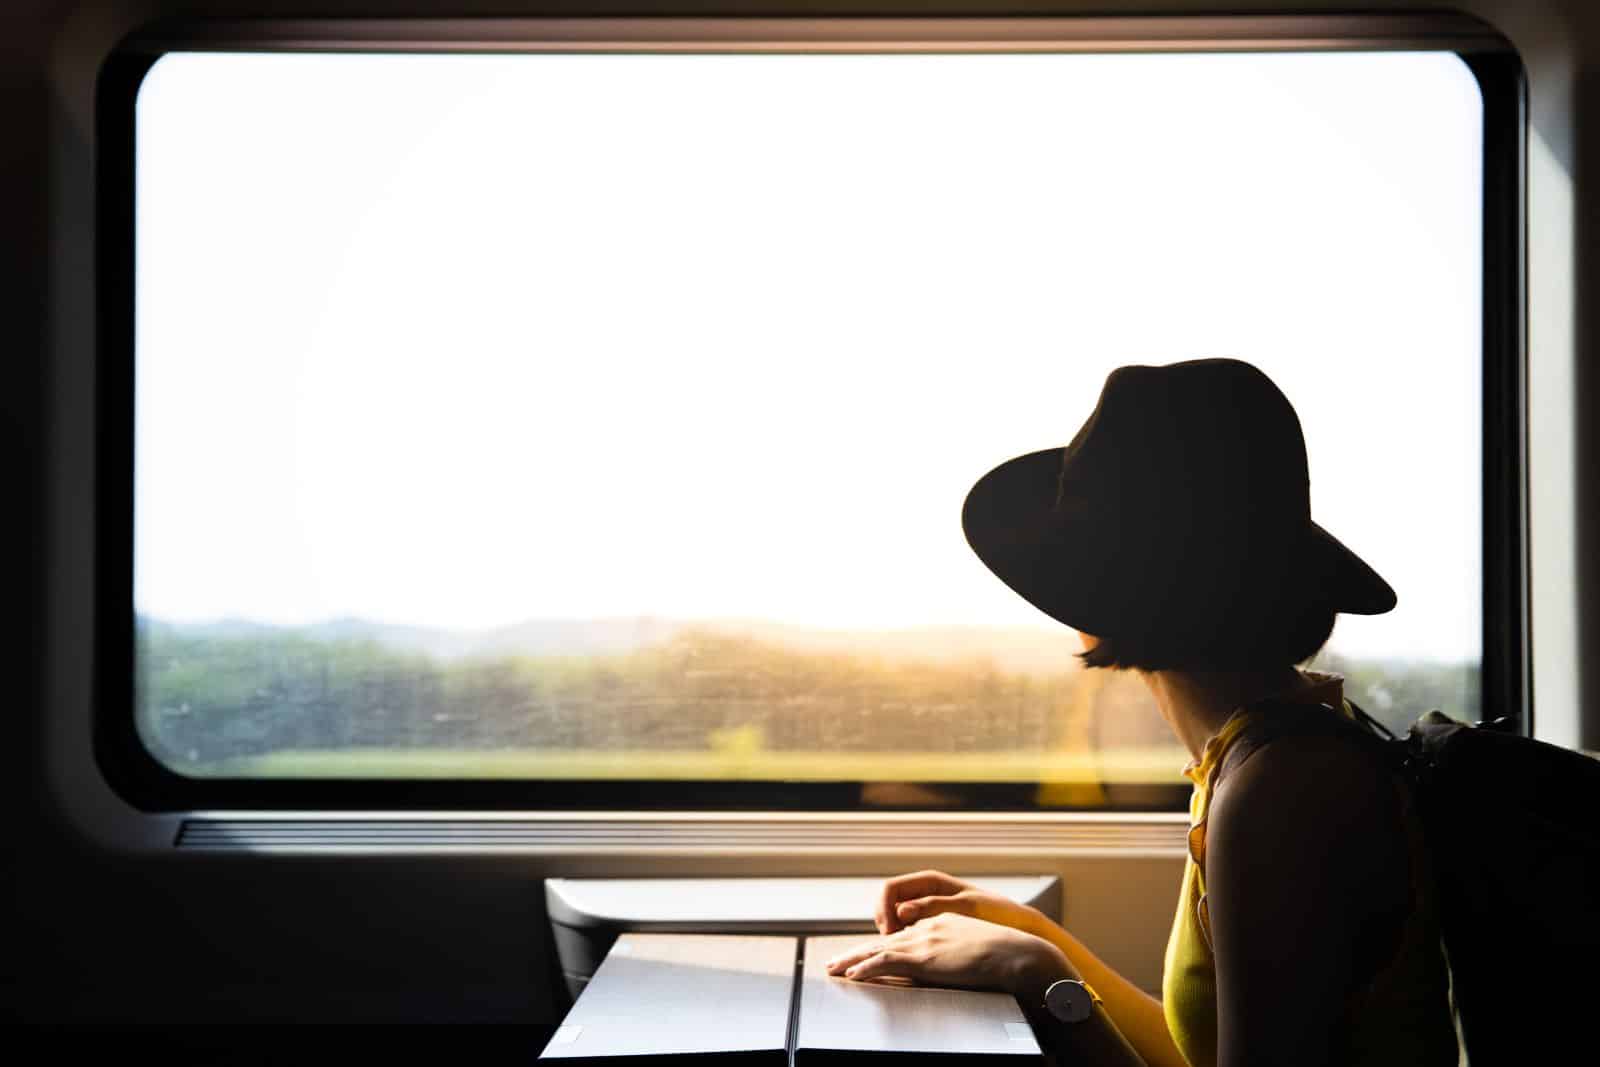 <p class="wp-caption-text">Image Credit: Shutterstock / CRAFT24</p>  <p><span>“Traveling is like flirting with life. It’s like saying, ‘I would stay and love you, but I have to go; this is my station.'” – Lisa St. Aubin de Terán</span></p>